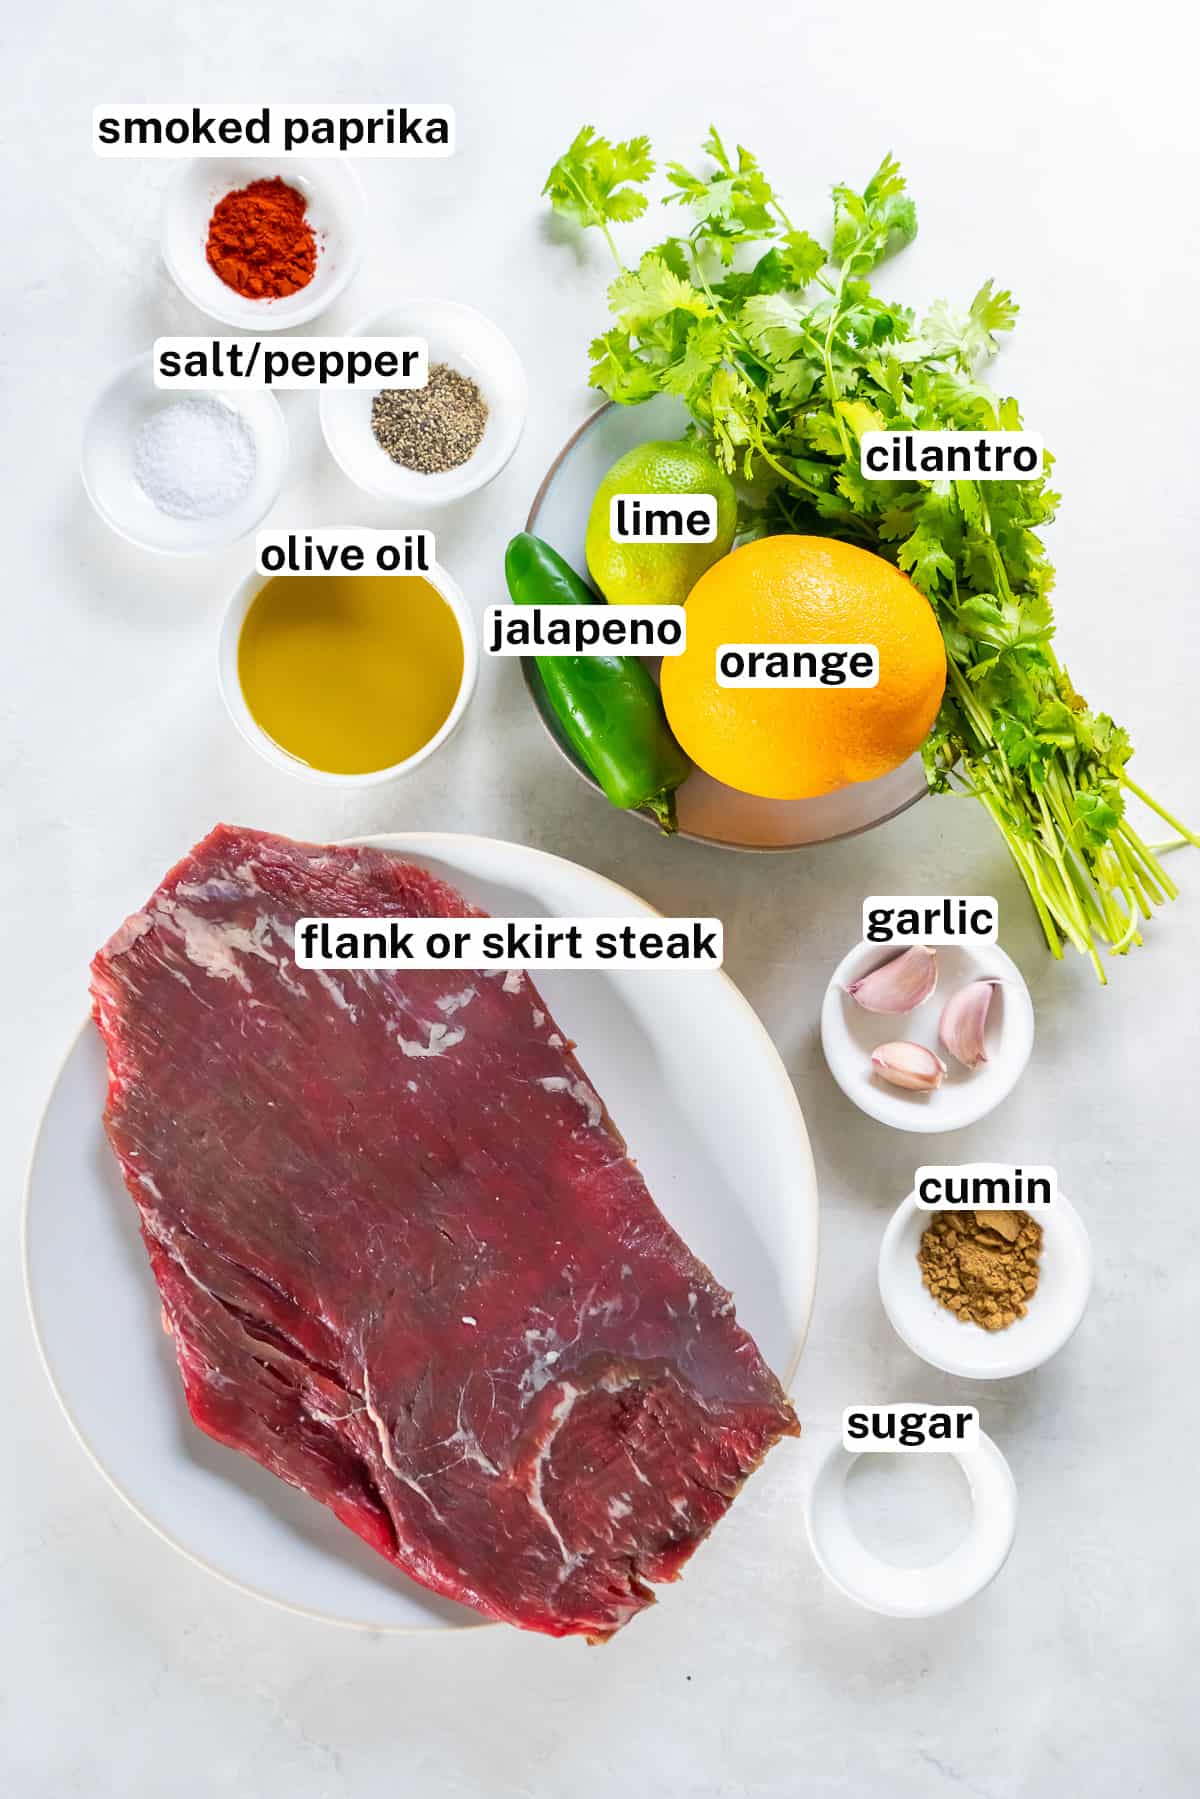 A flank steak and other ingredients to make carne asada.